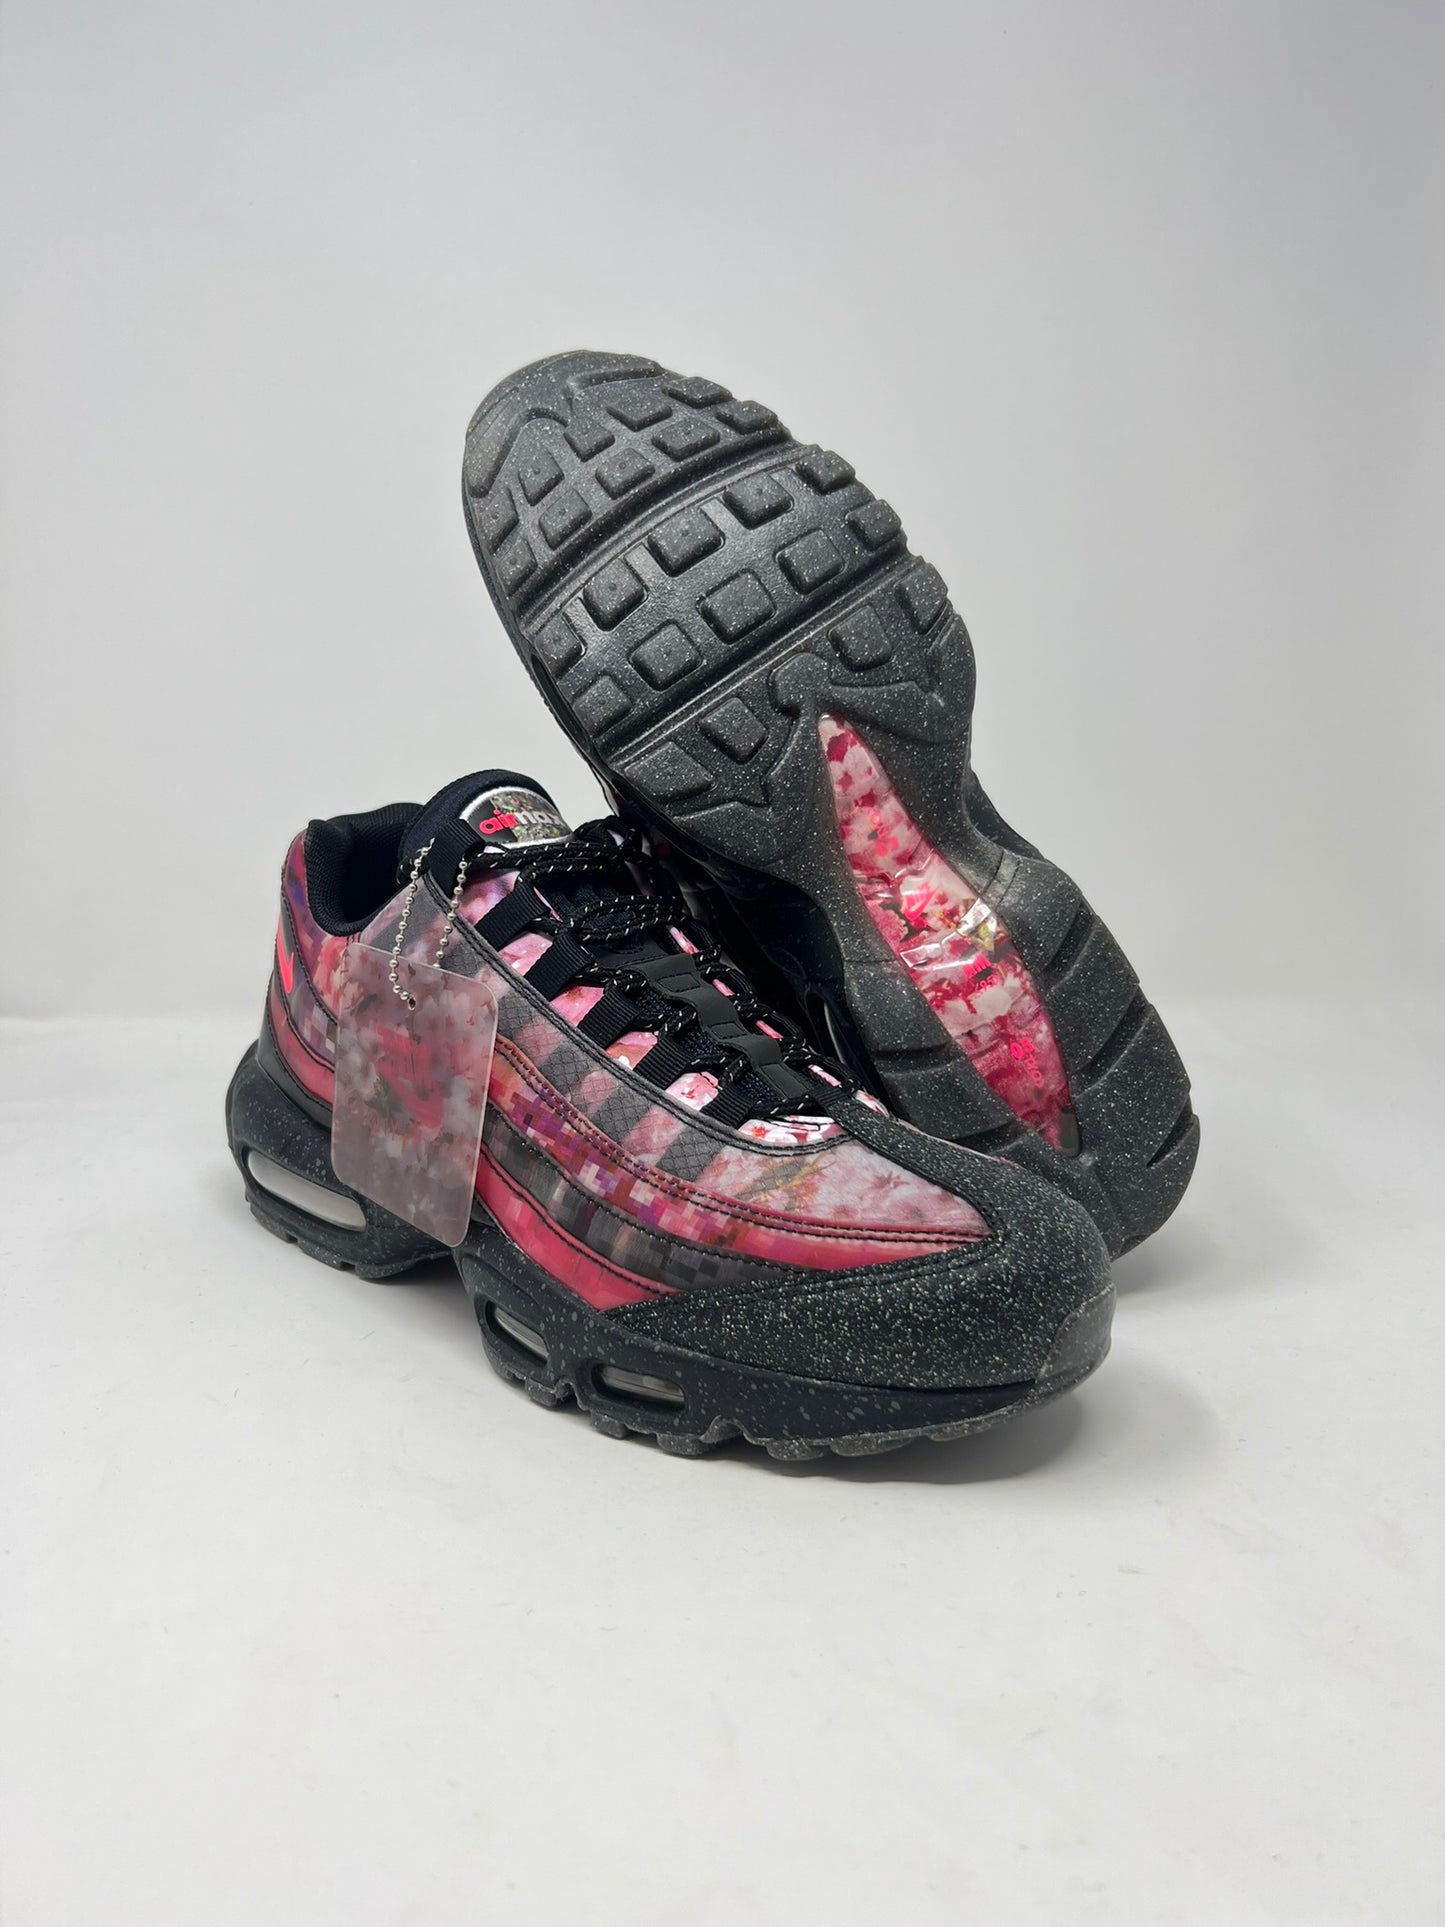 Nike Air Max 95 Cherry Blossom UK8.5 DS